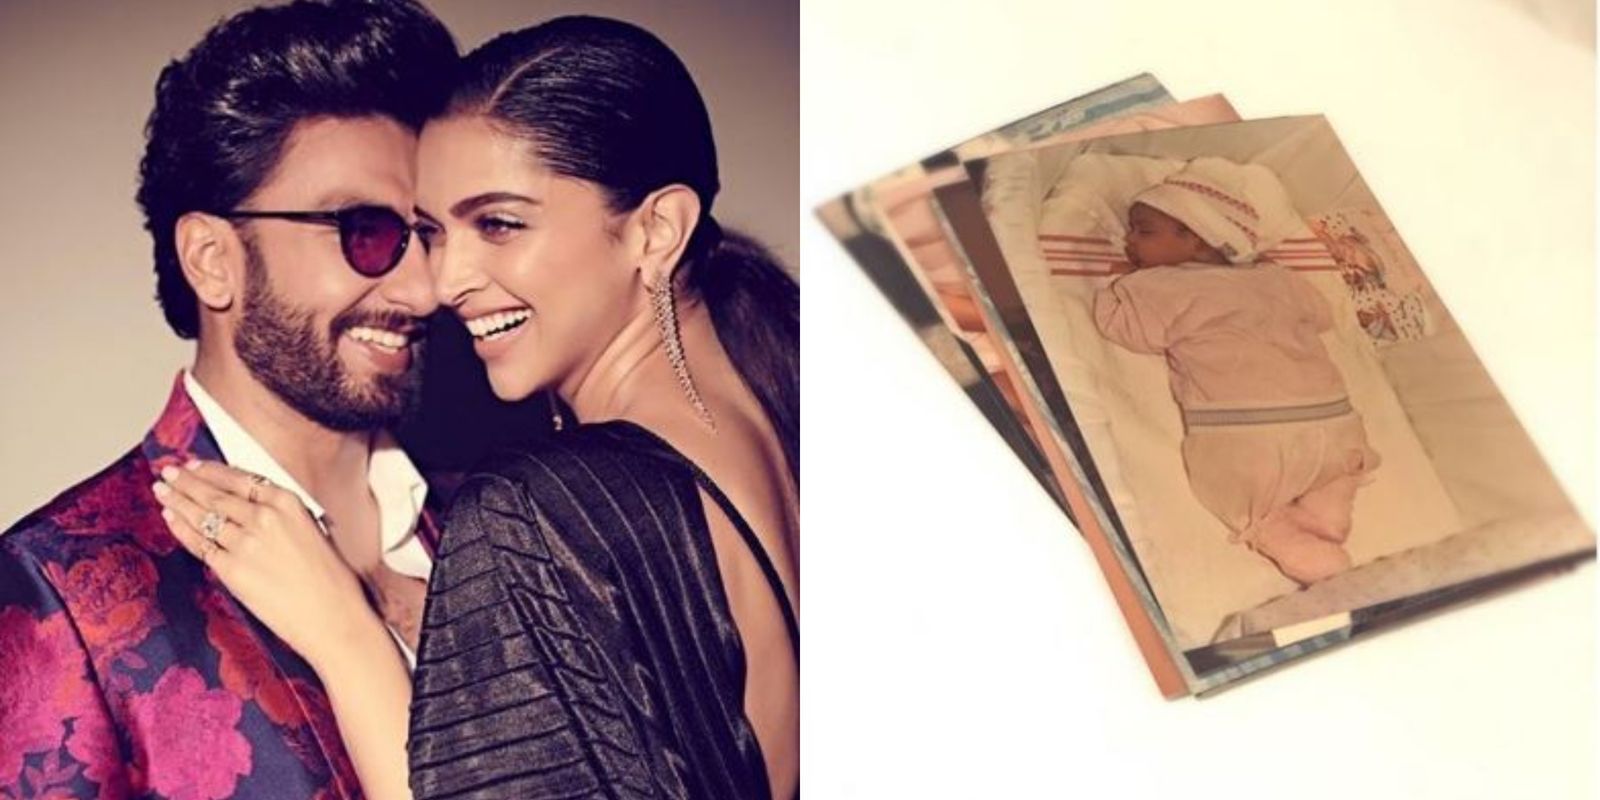 Deepika Padukone Sharing Her Pictures As A Baby Makes Fans Wonder If There's Some Good News On The Way